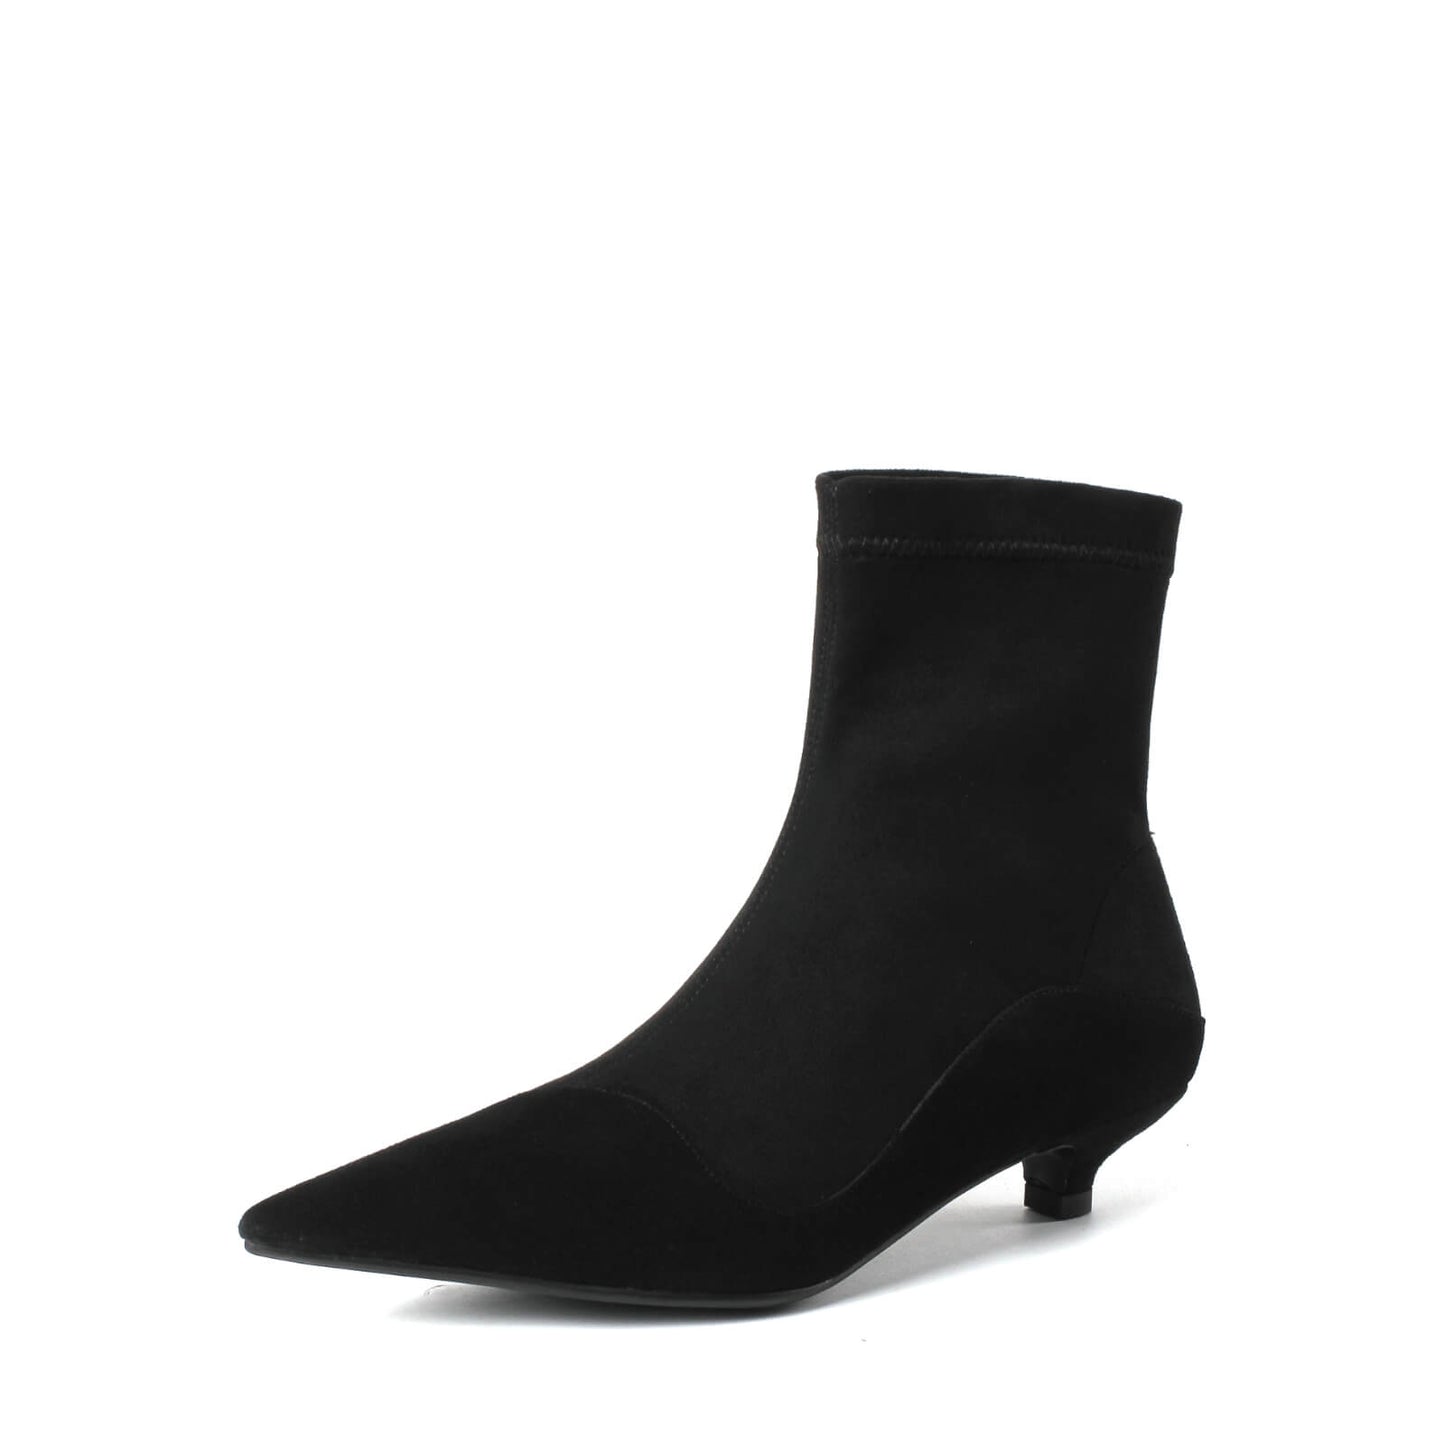 Kaly-Kitten-Heels-Pointed-Toe-Stitching-Vamp-Black-Ankle-Boots-Suede